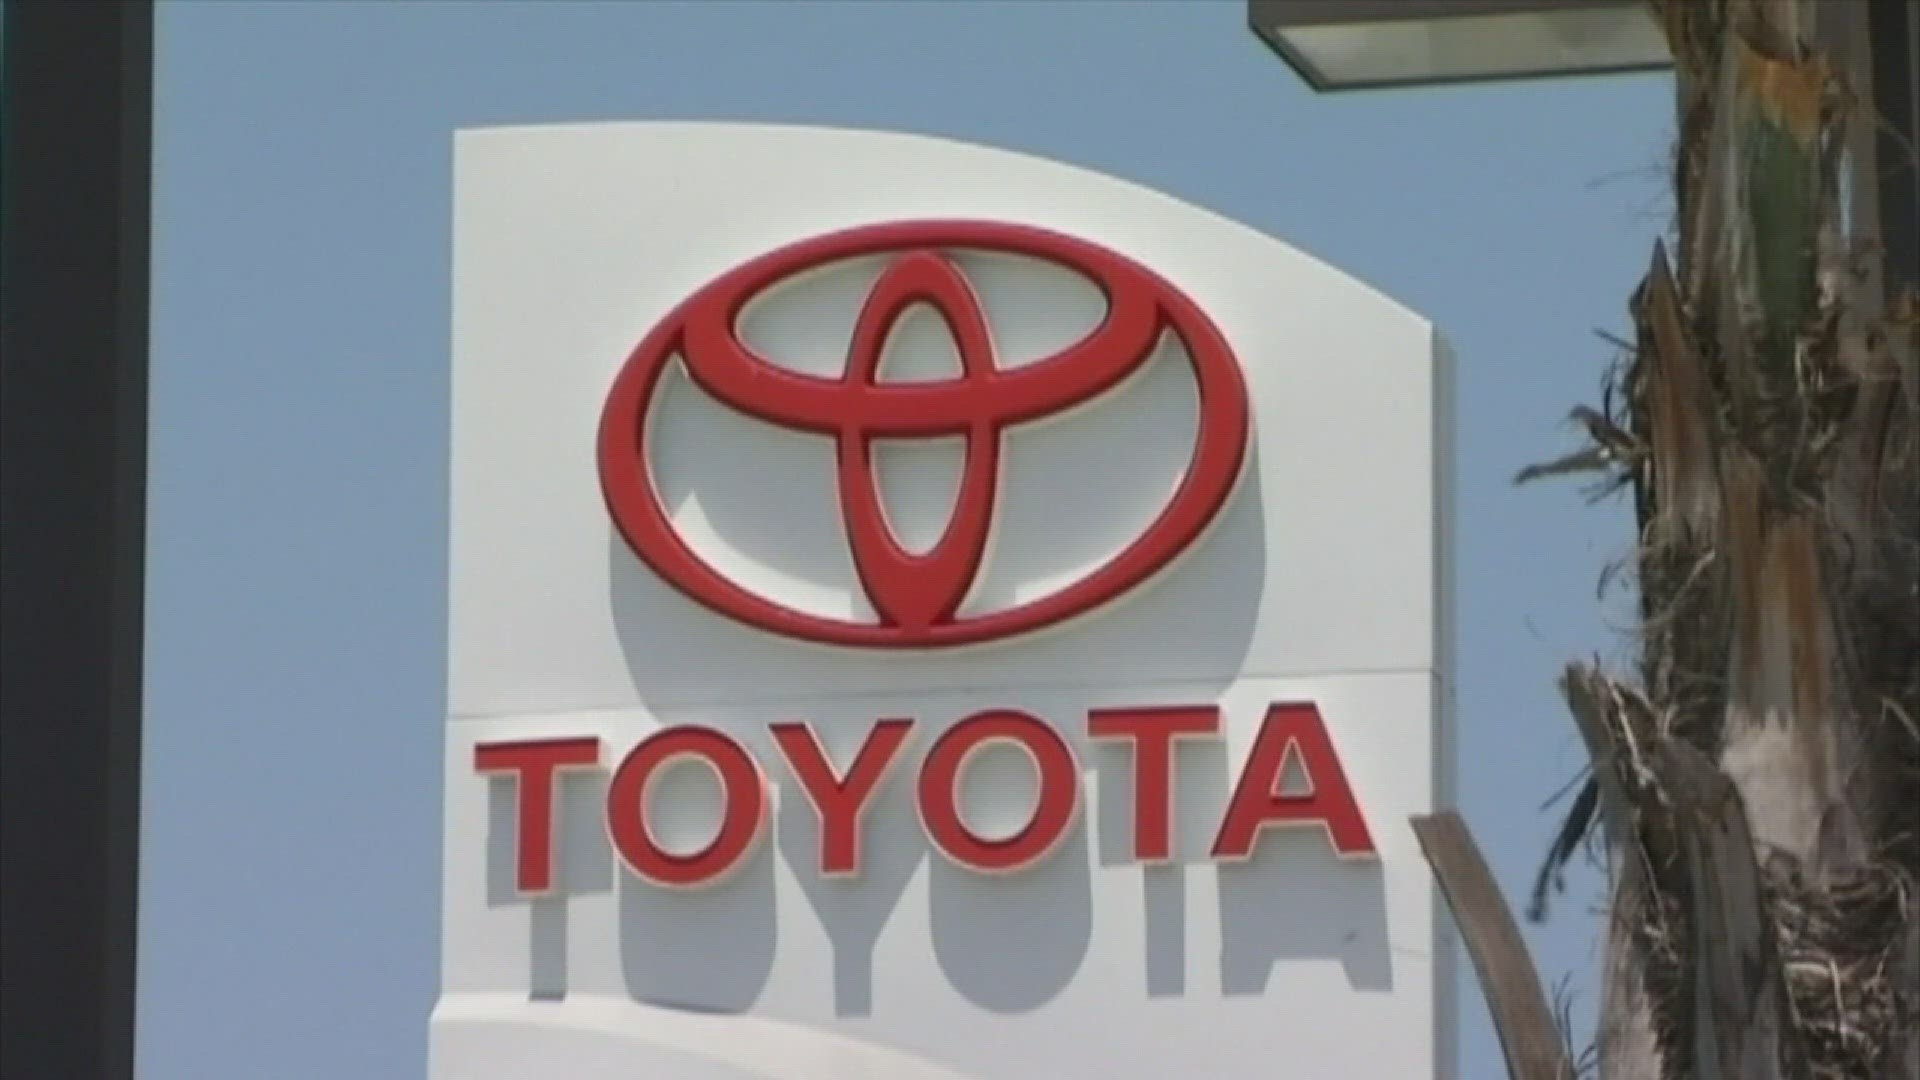 The recall covers a range of Toyota and Lexus vehicles with model years from 2020 to 2022.